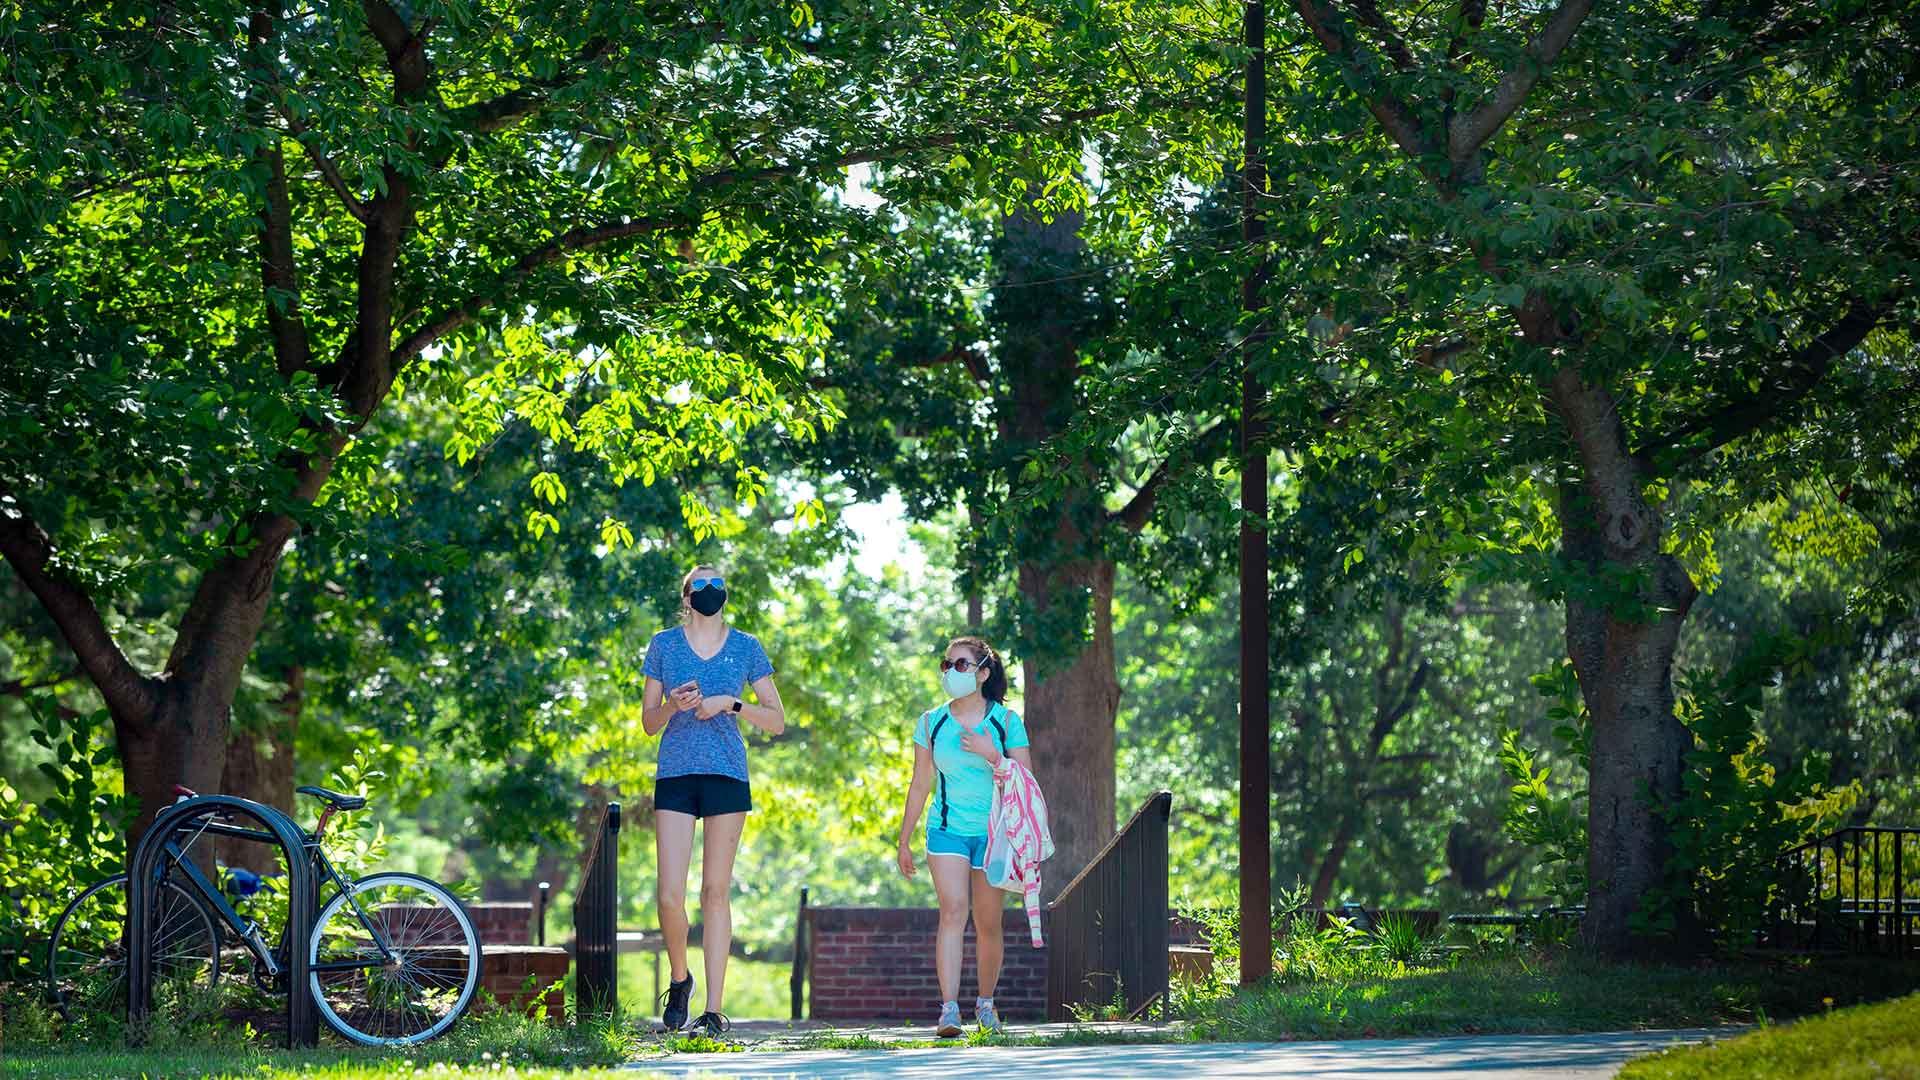 Students walking along campus pathway during the summer